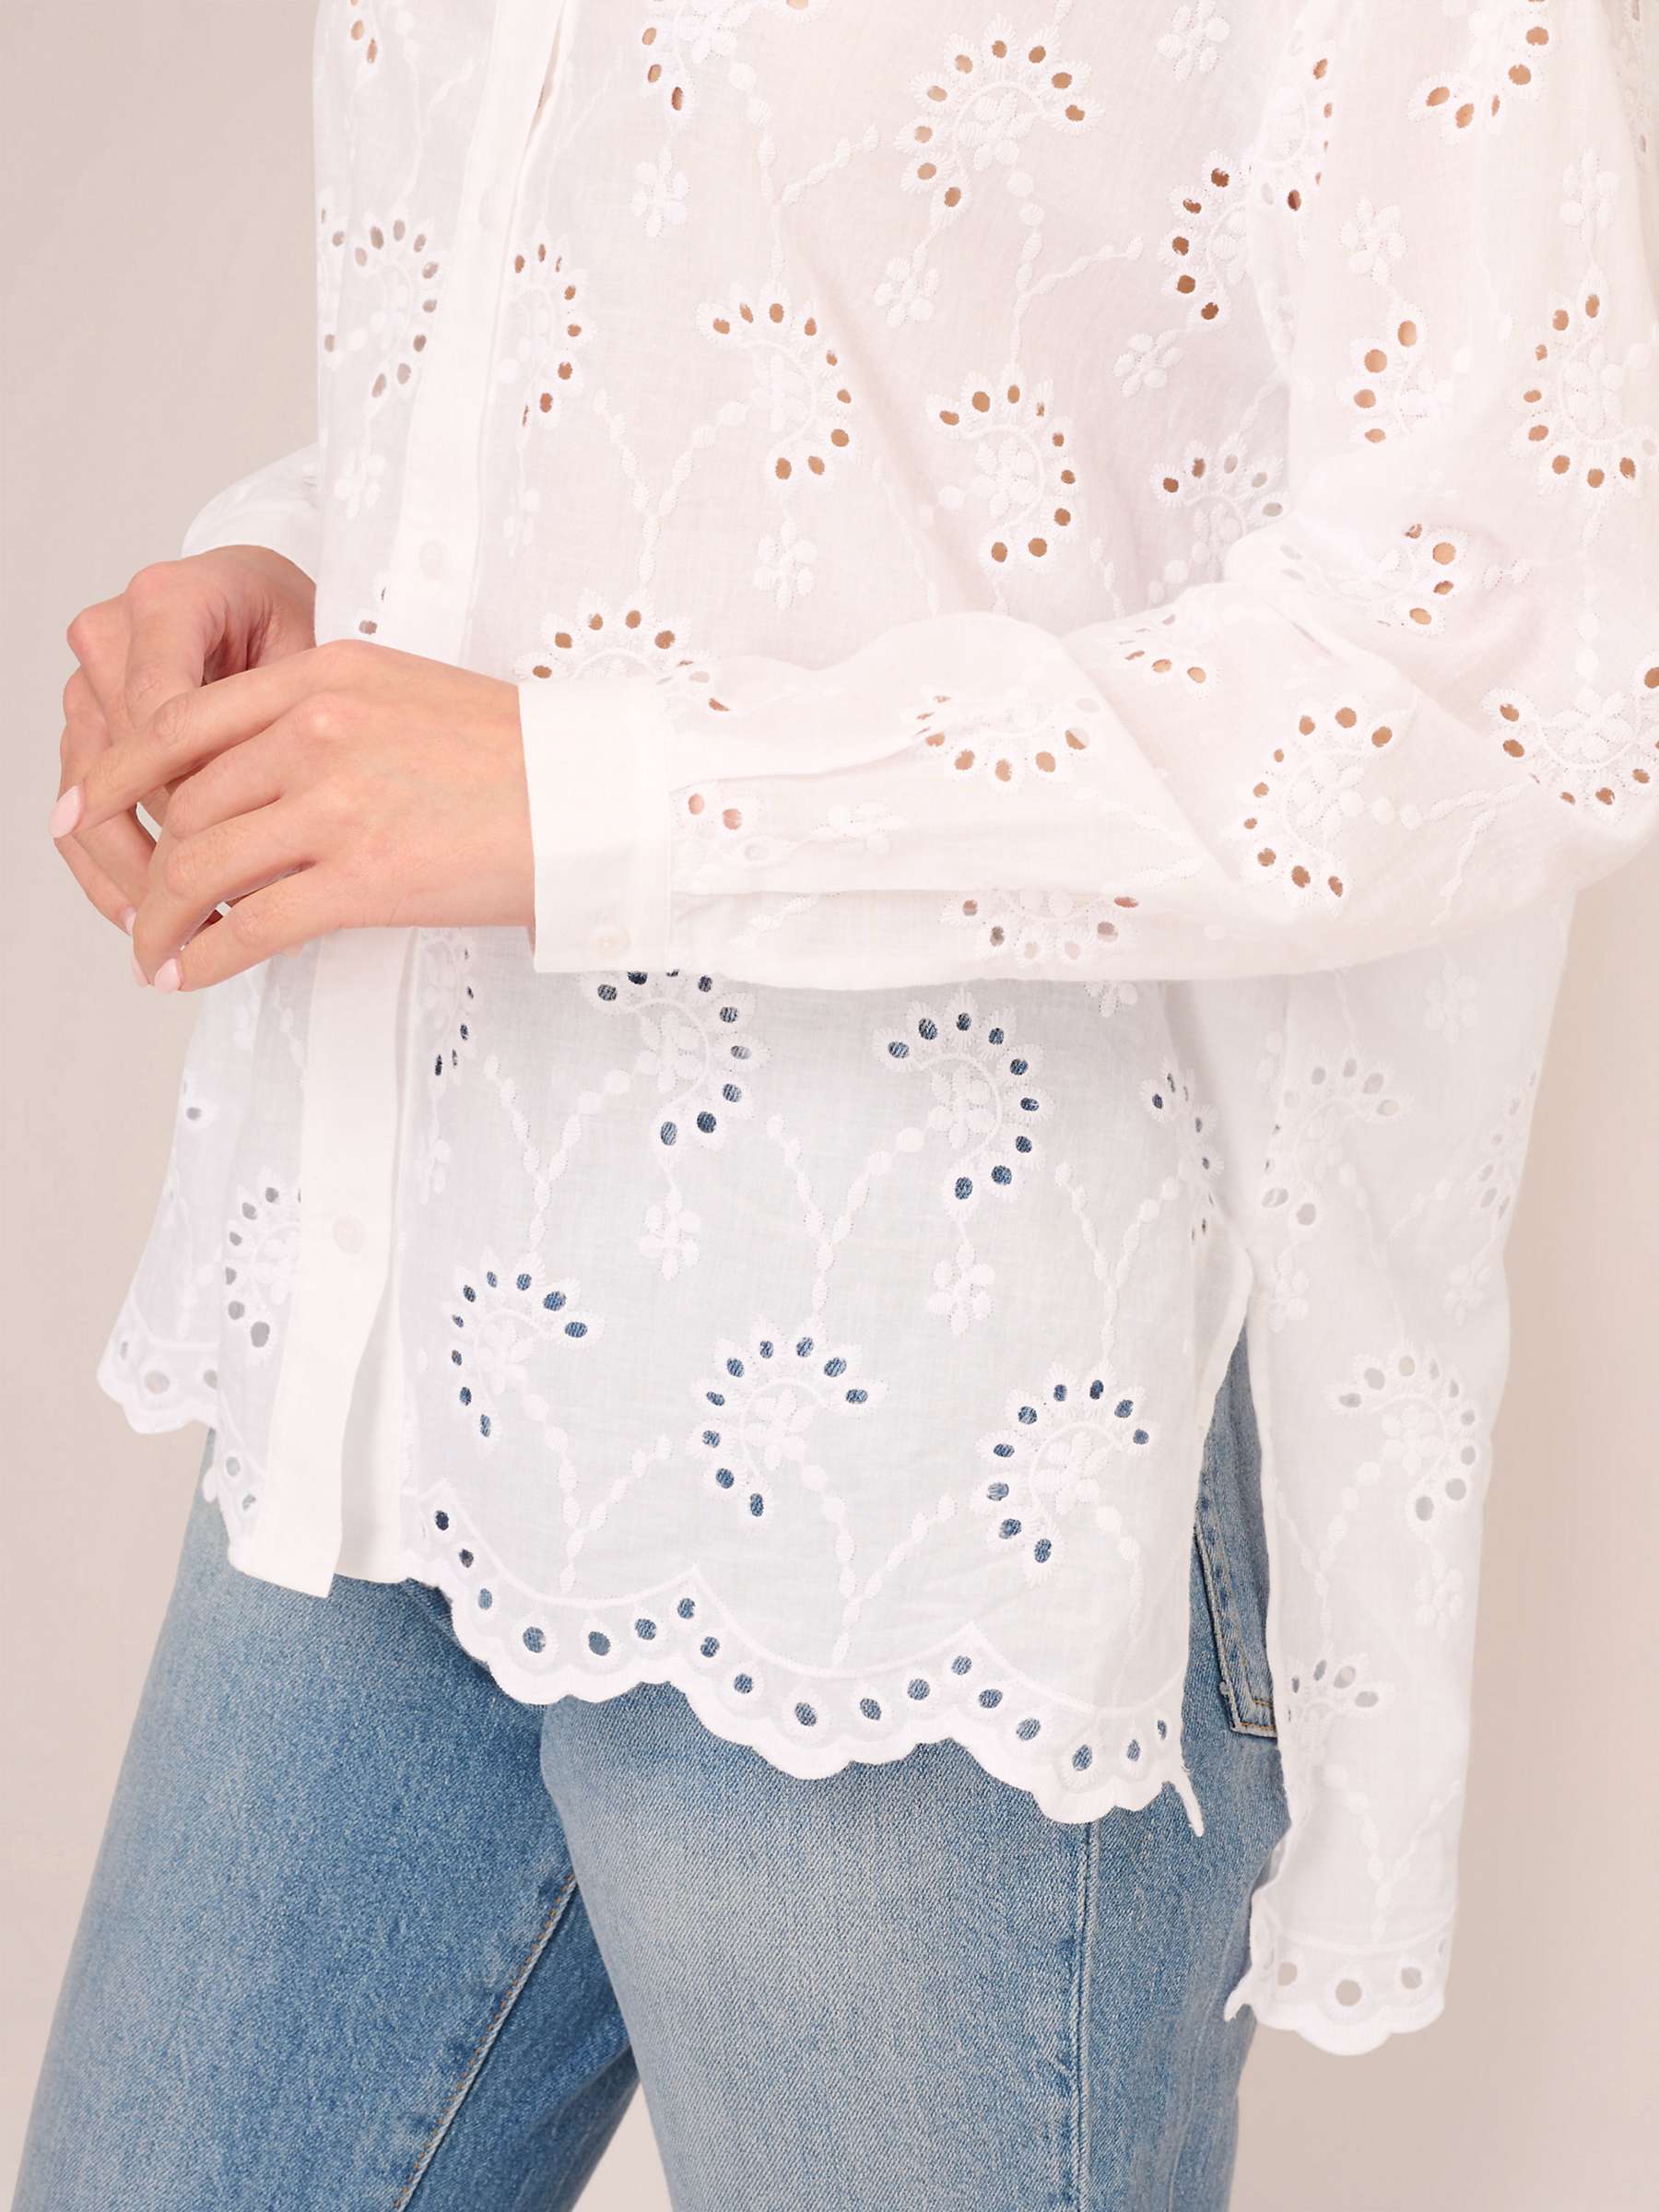 Buy Adrianna Papell Eyelet Broderie Button Front Tunic Shirt, White Online at johnlewis.com